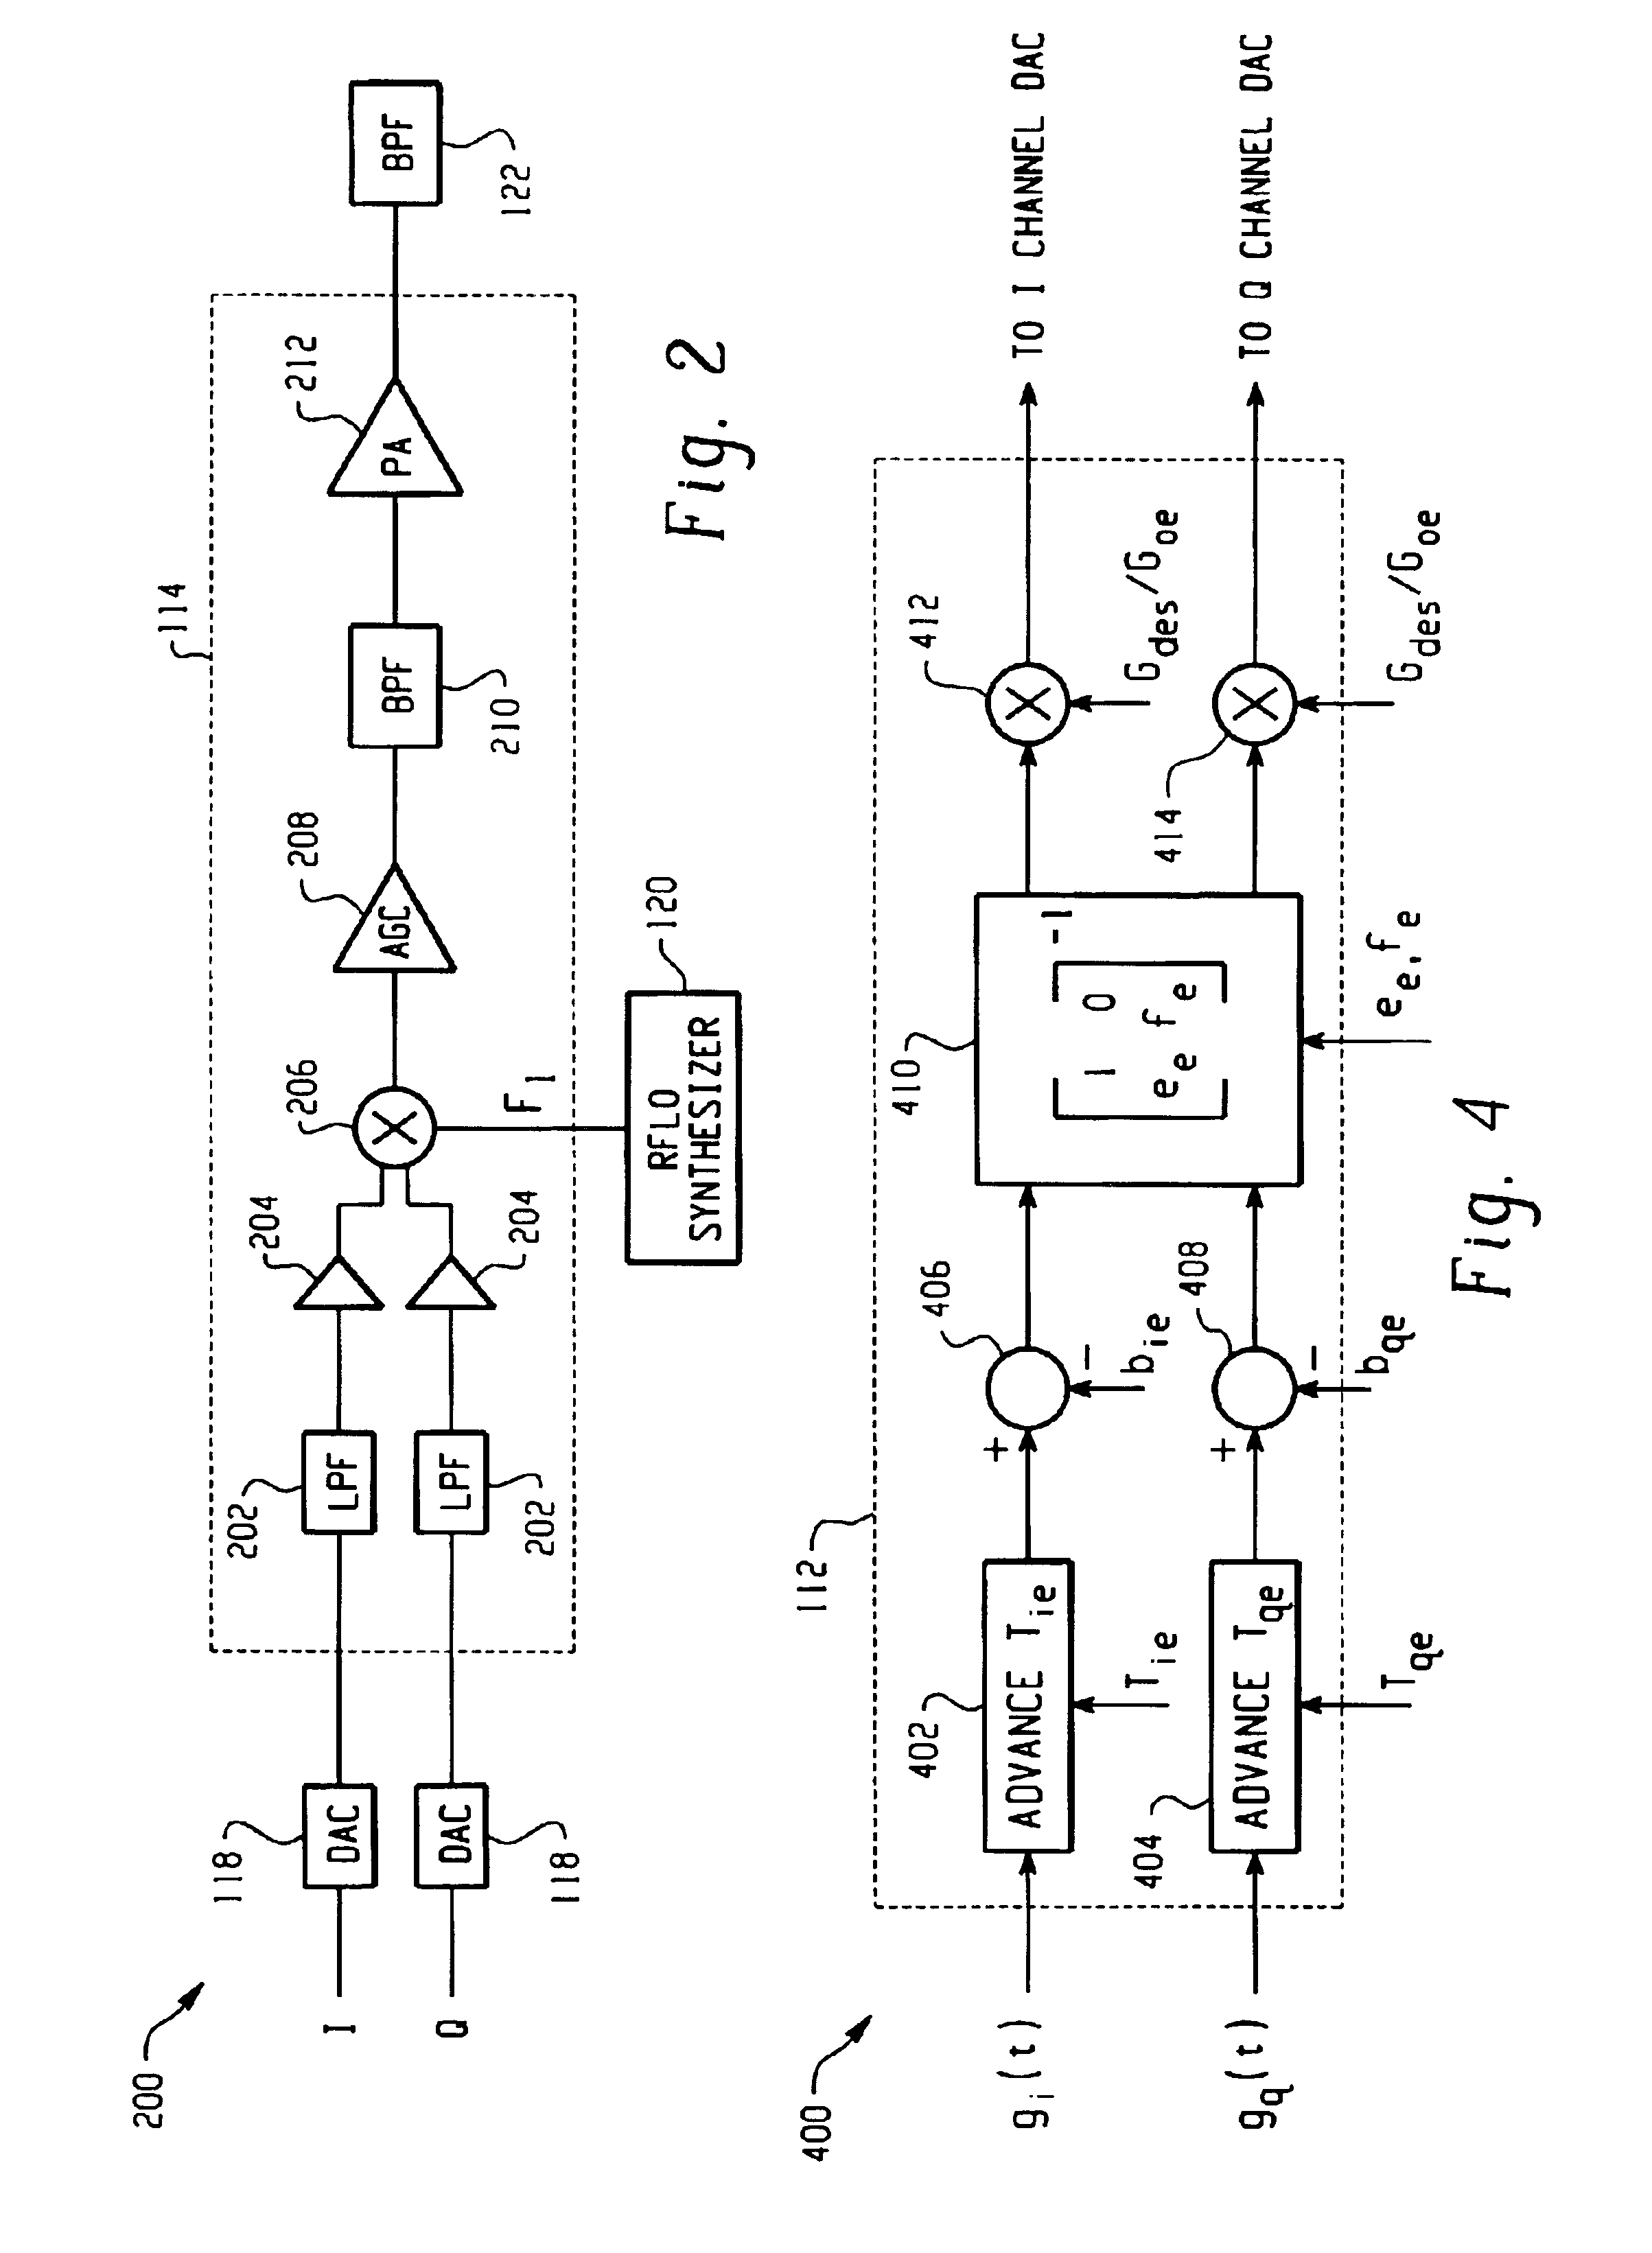 Feedback compensation detector for a direct conversion transmitter